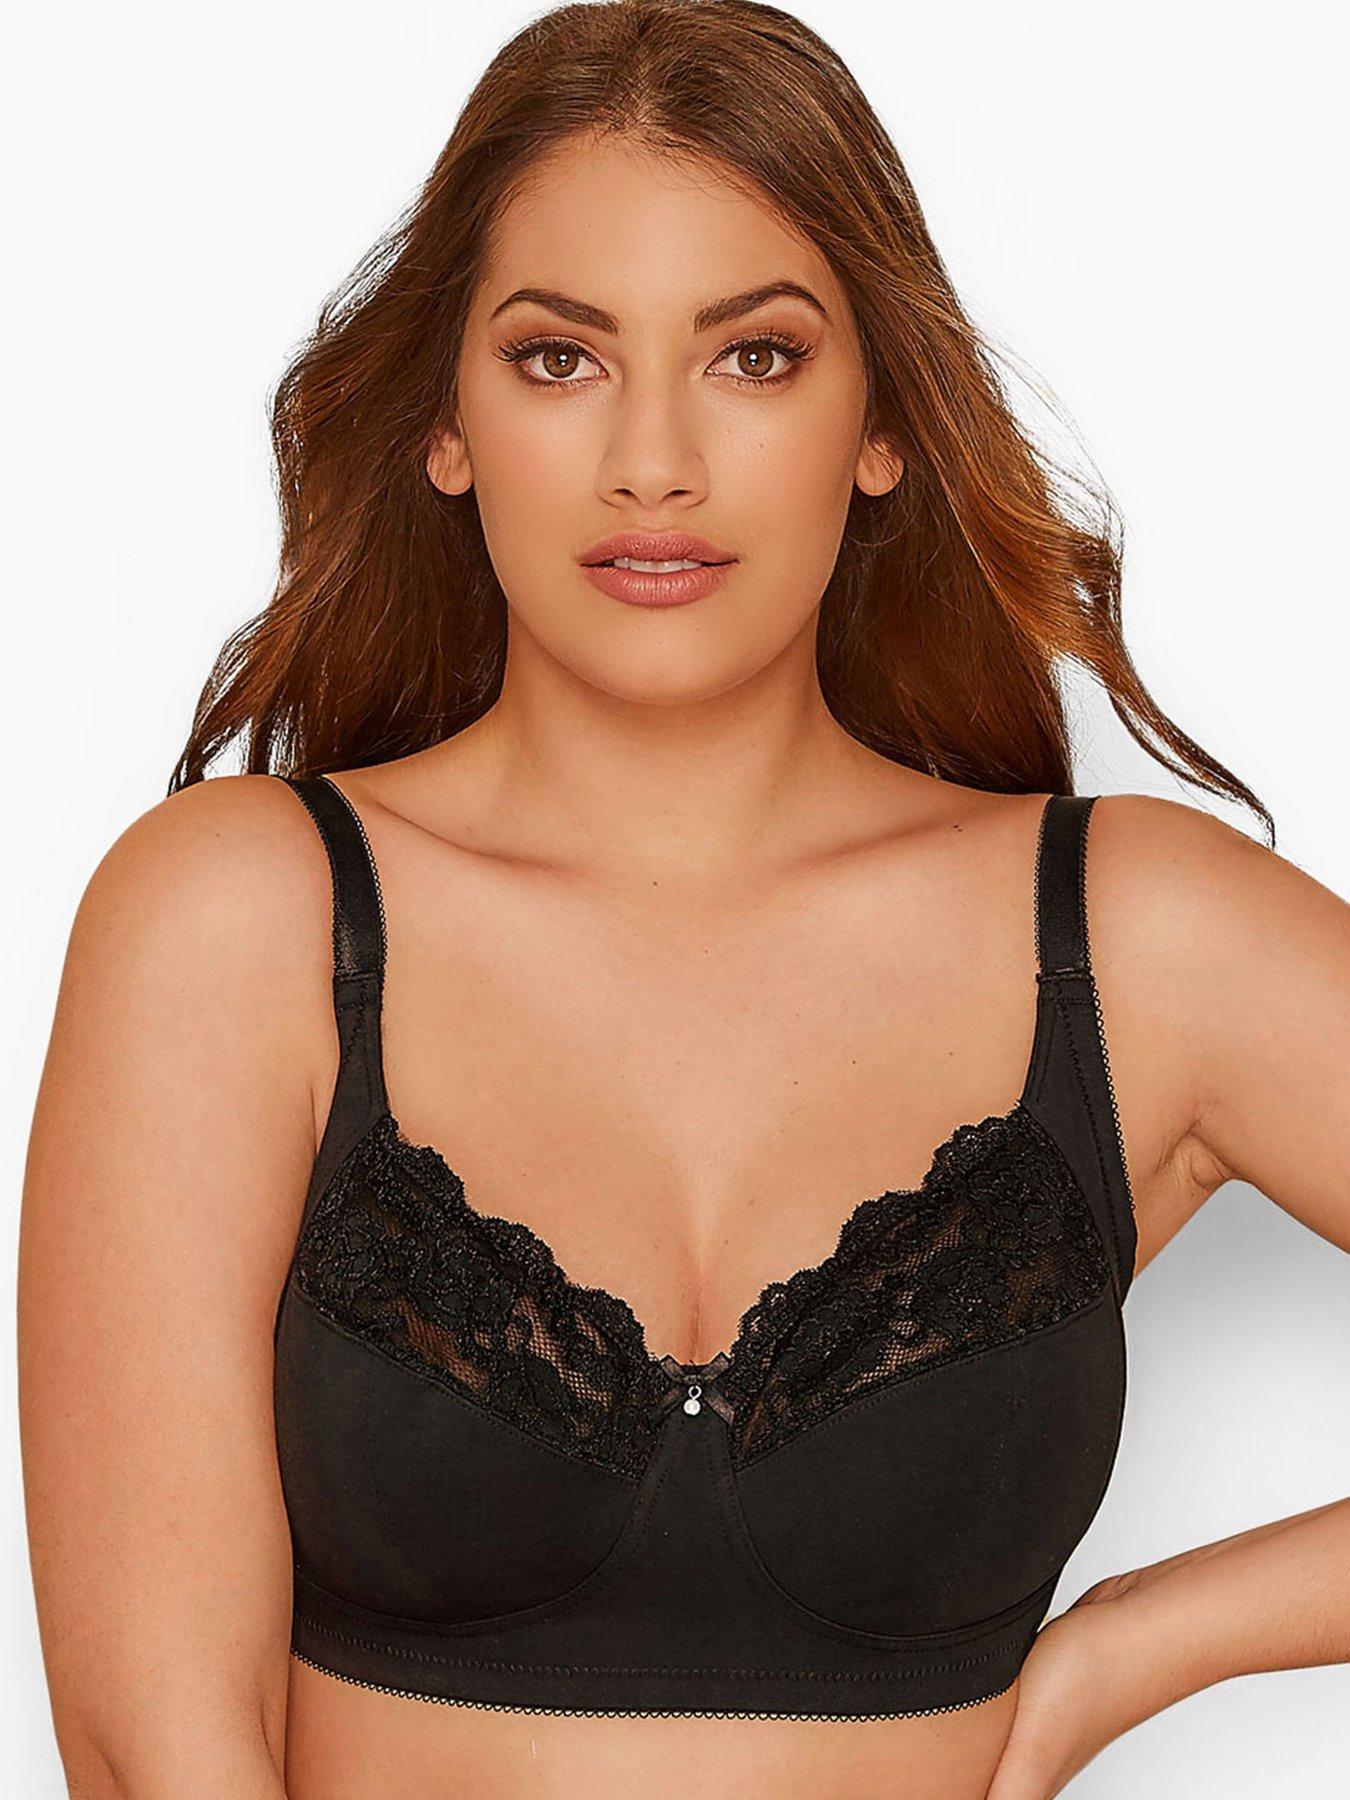 Fantasie Jacqueline Full Cup Bra with Side Support - Underwraps